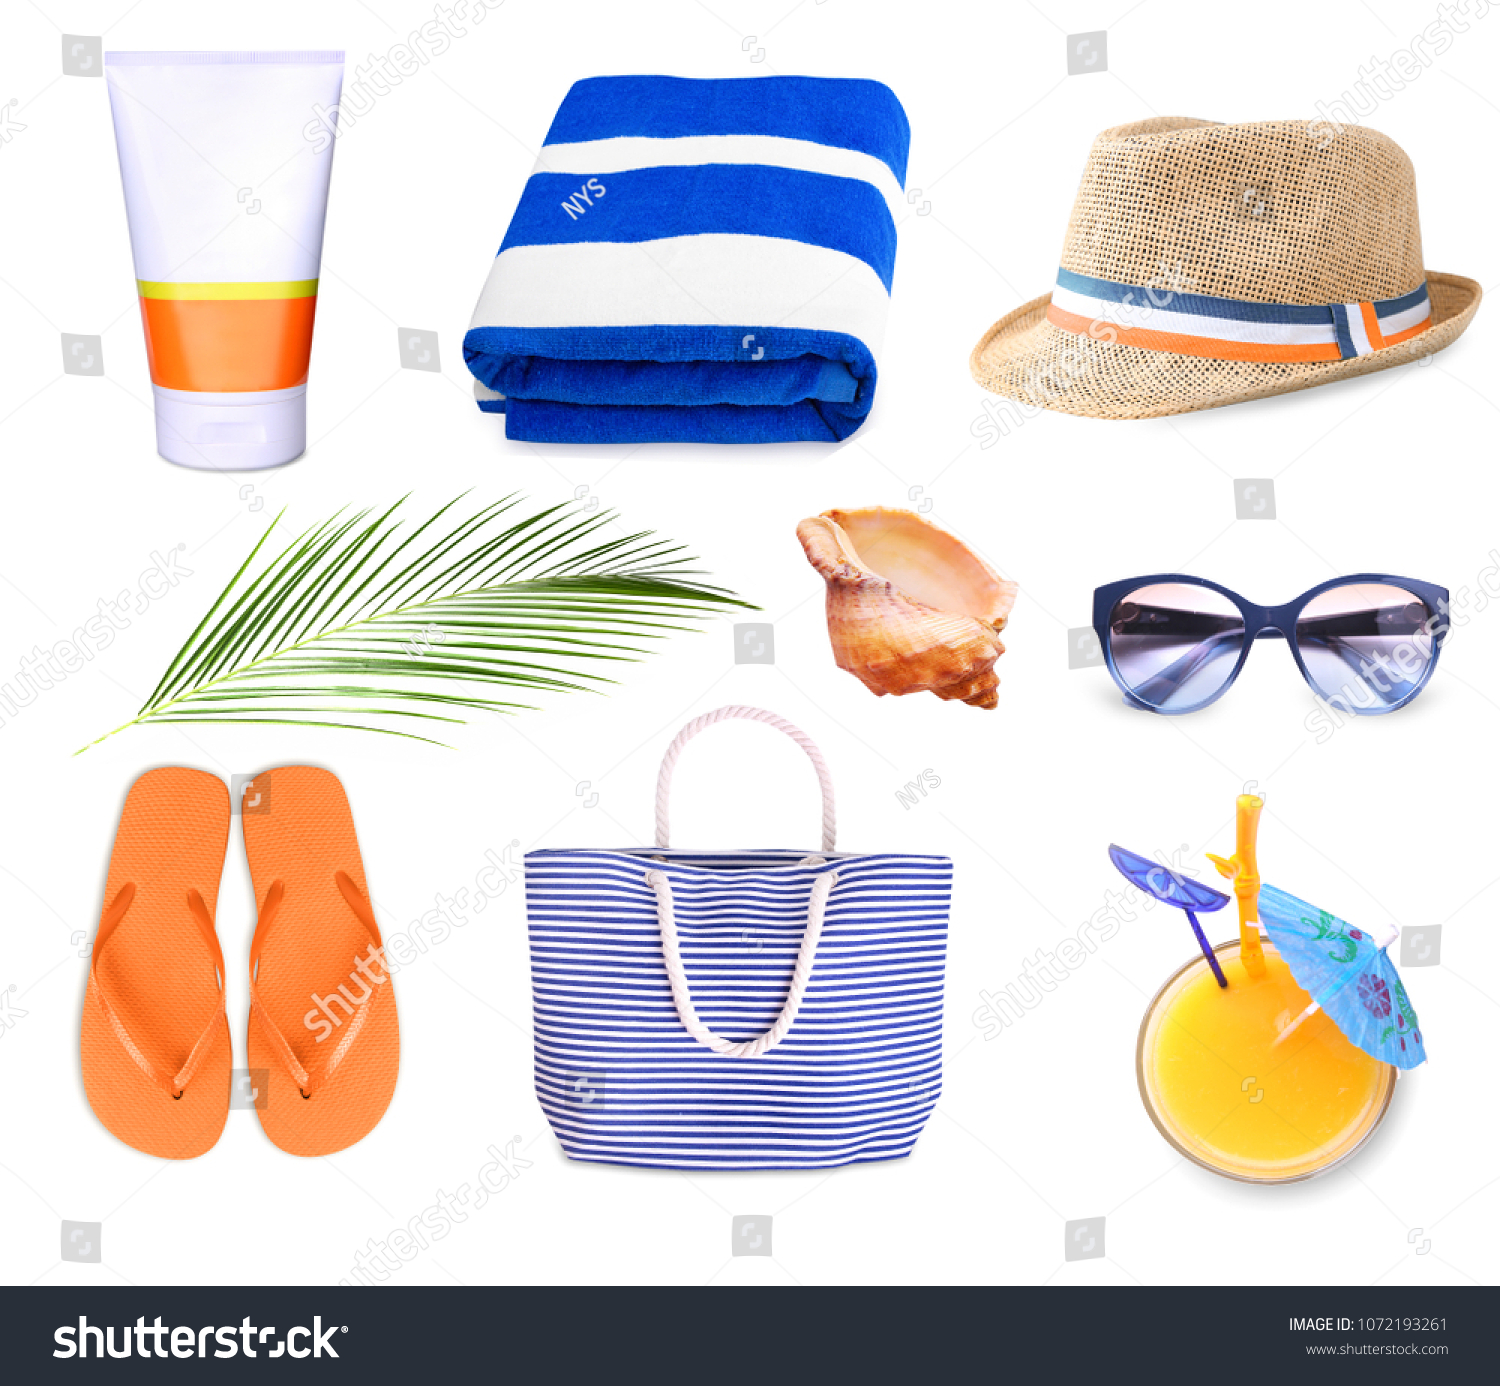 Summer resort objects collage isolated.Beach staff accessories set.Towel,hat,bag. #1072193261